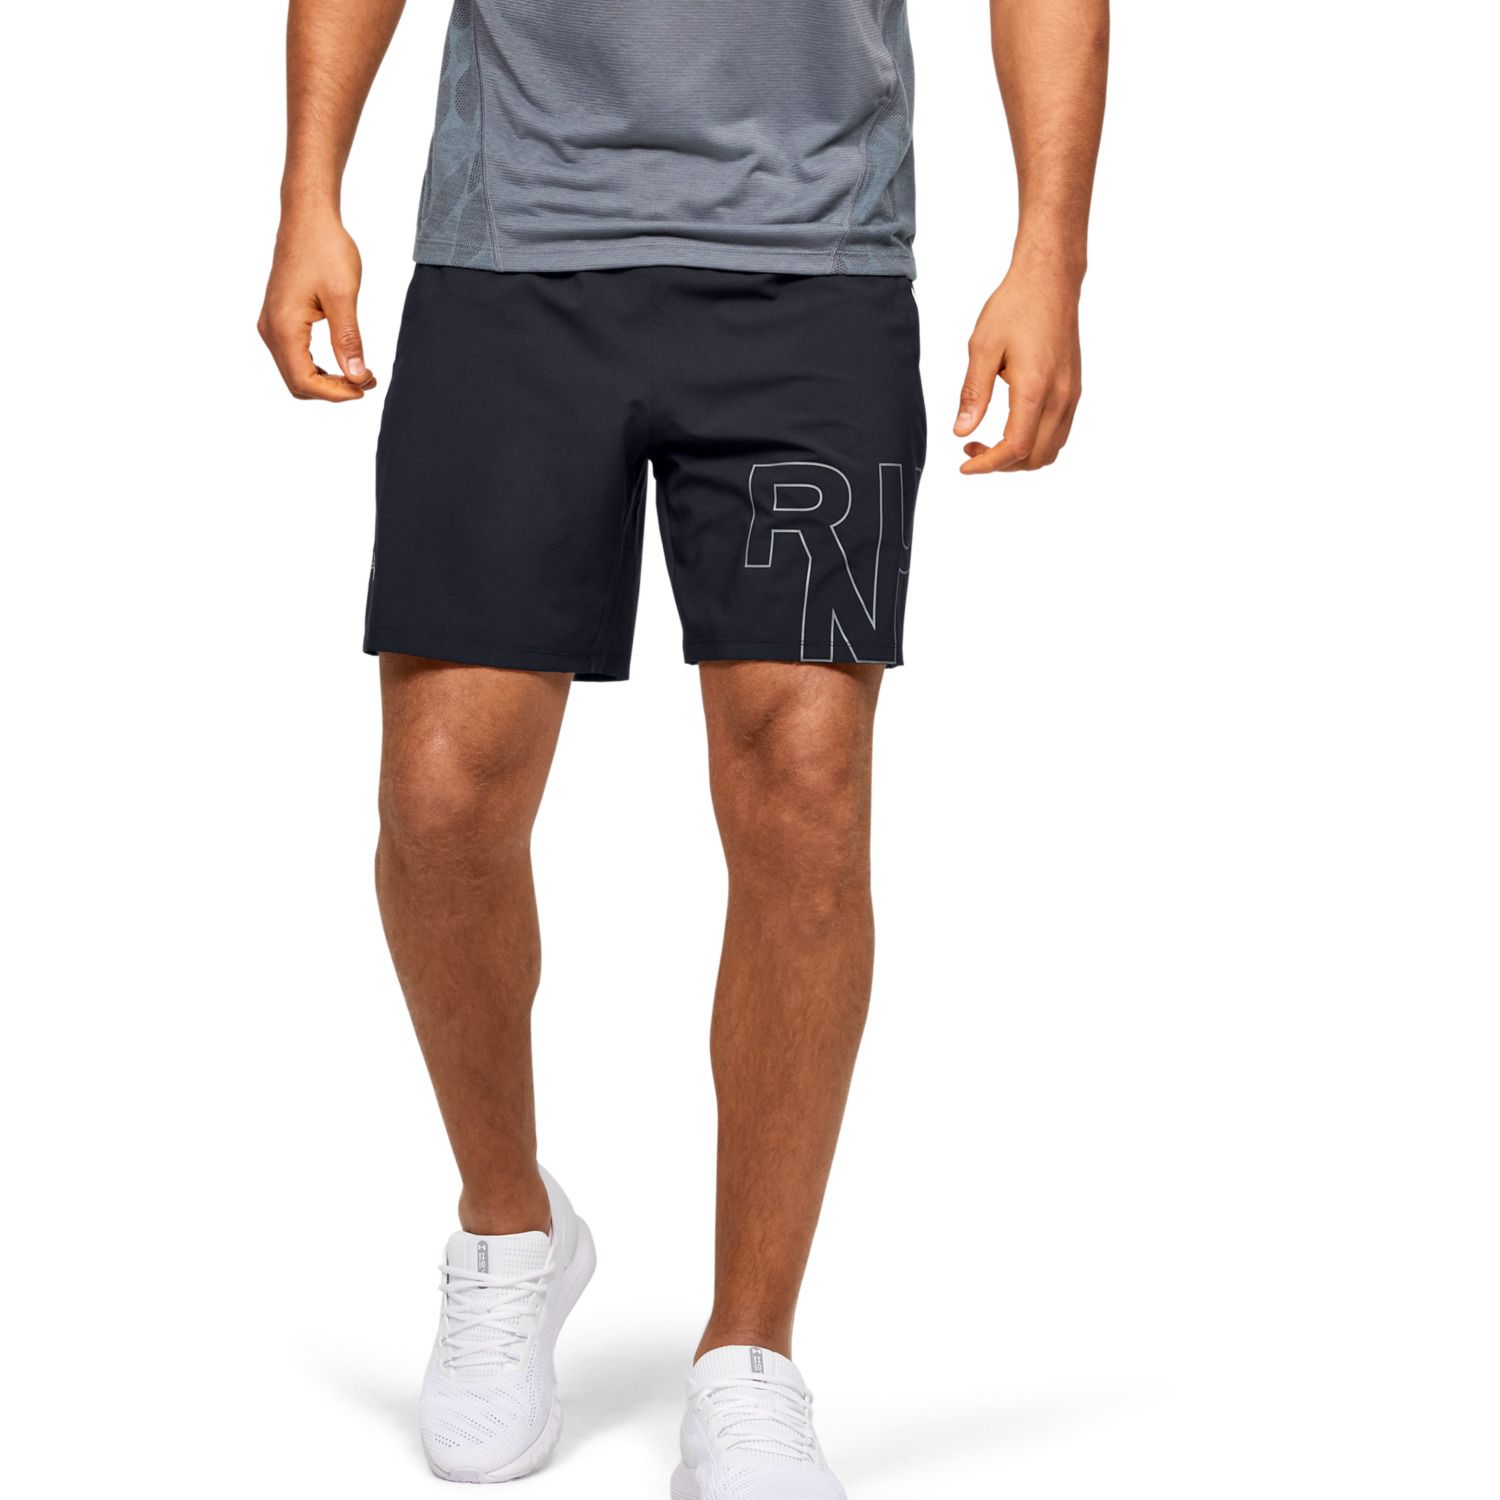 7 inch under armour shorts